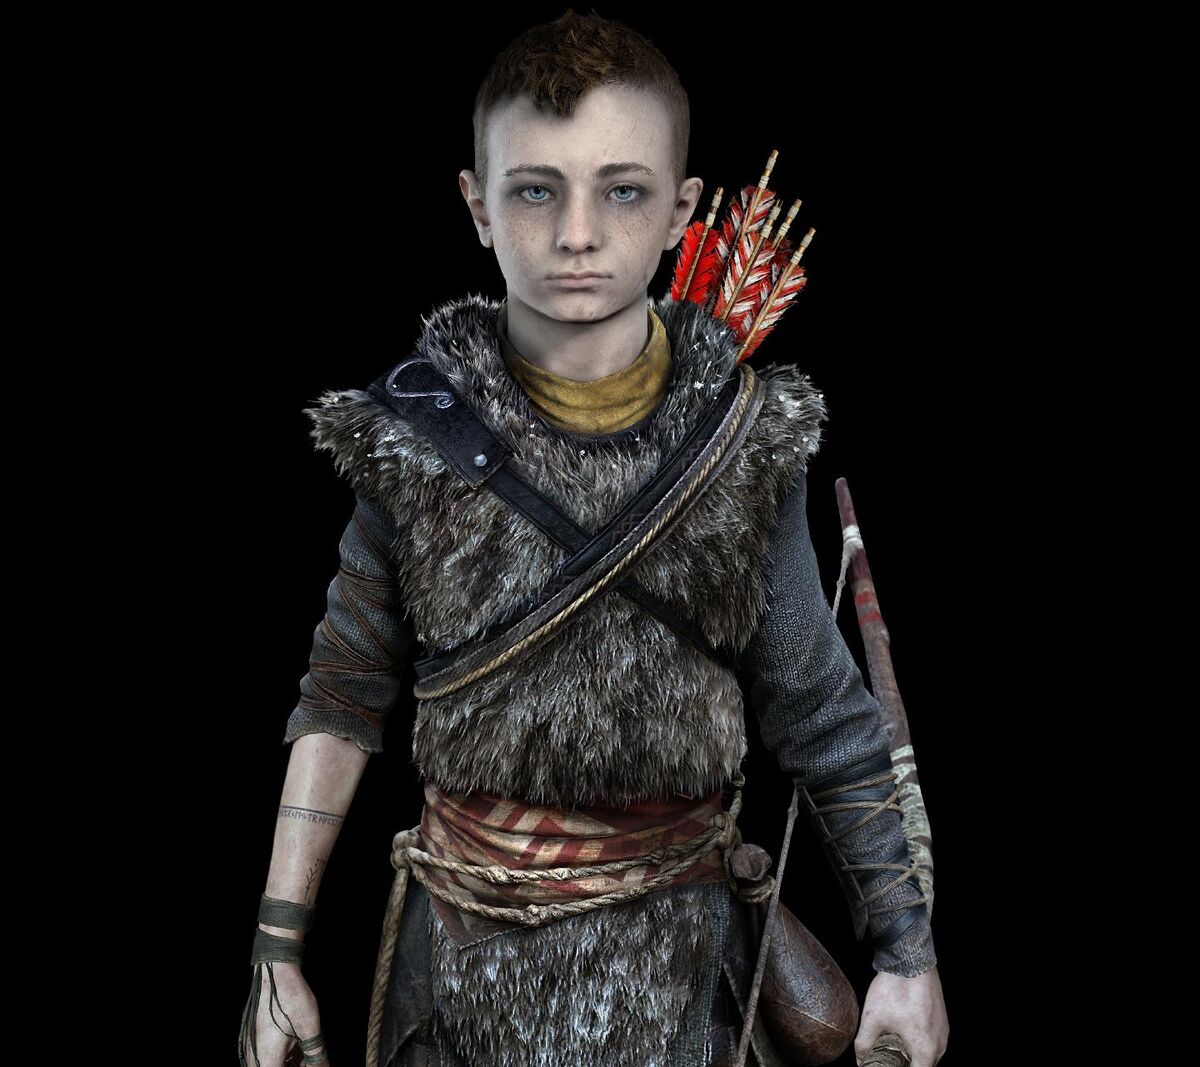 danielboy on X: How tall is Thor from kratos and atreus